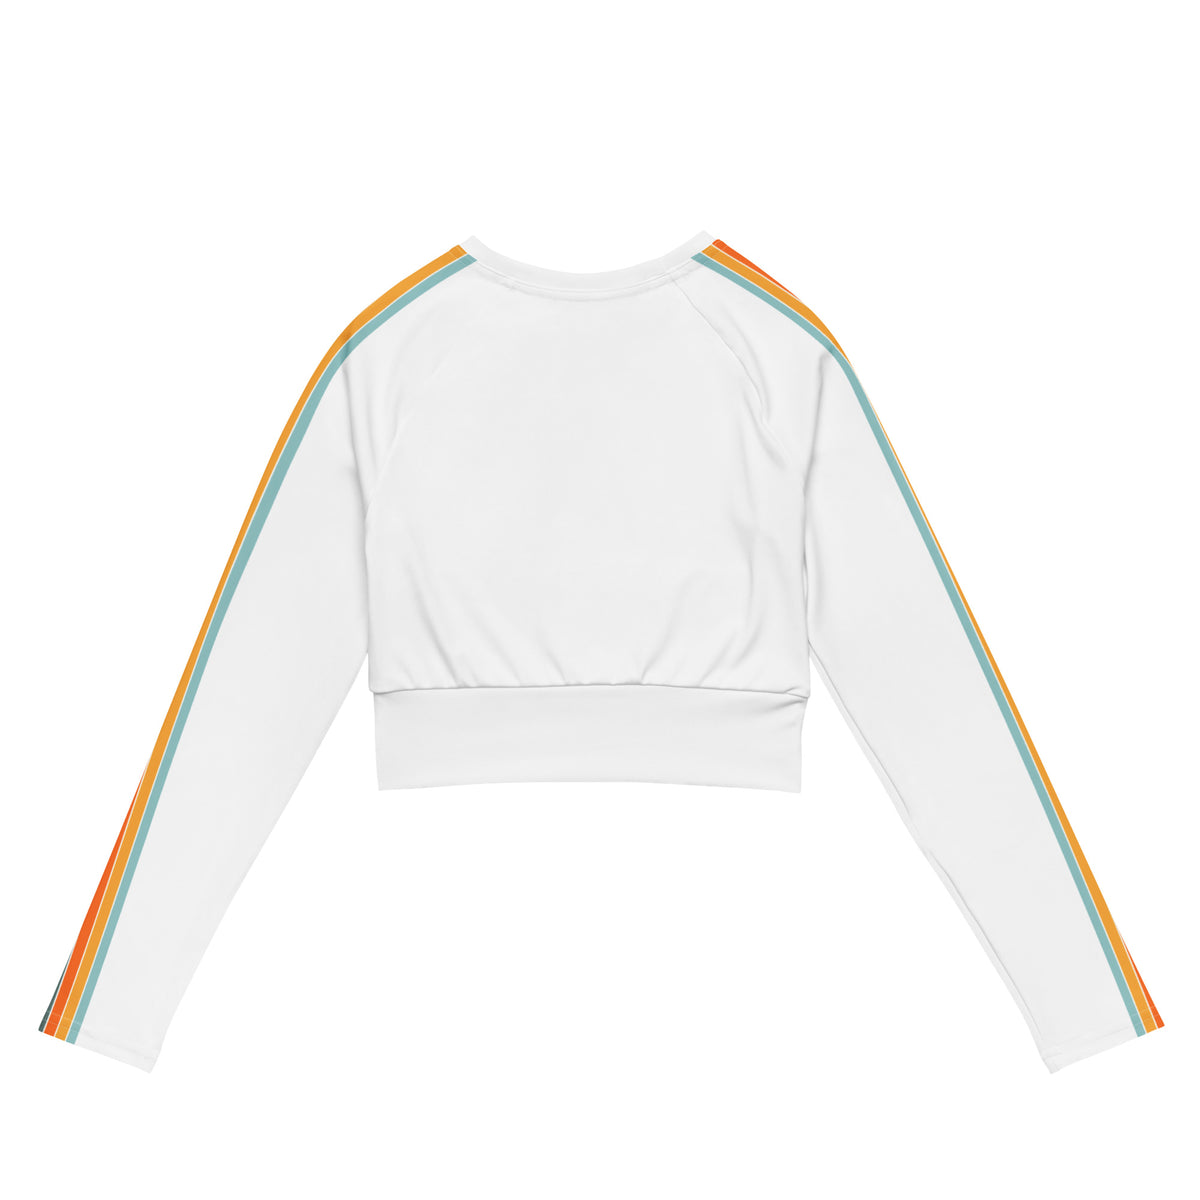 Eco Retro Recycled long-sleeve crop top activewear - Retro Vibe Collection - Area F Island Clothing